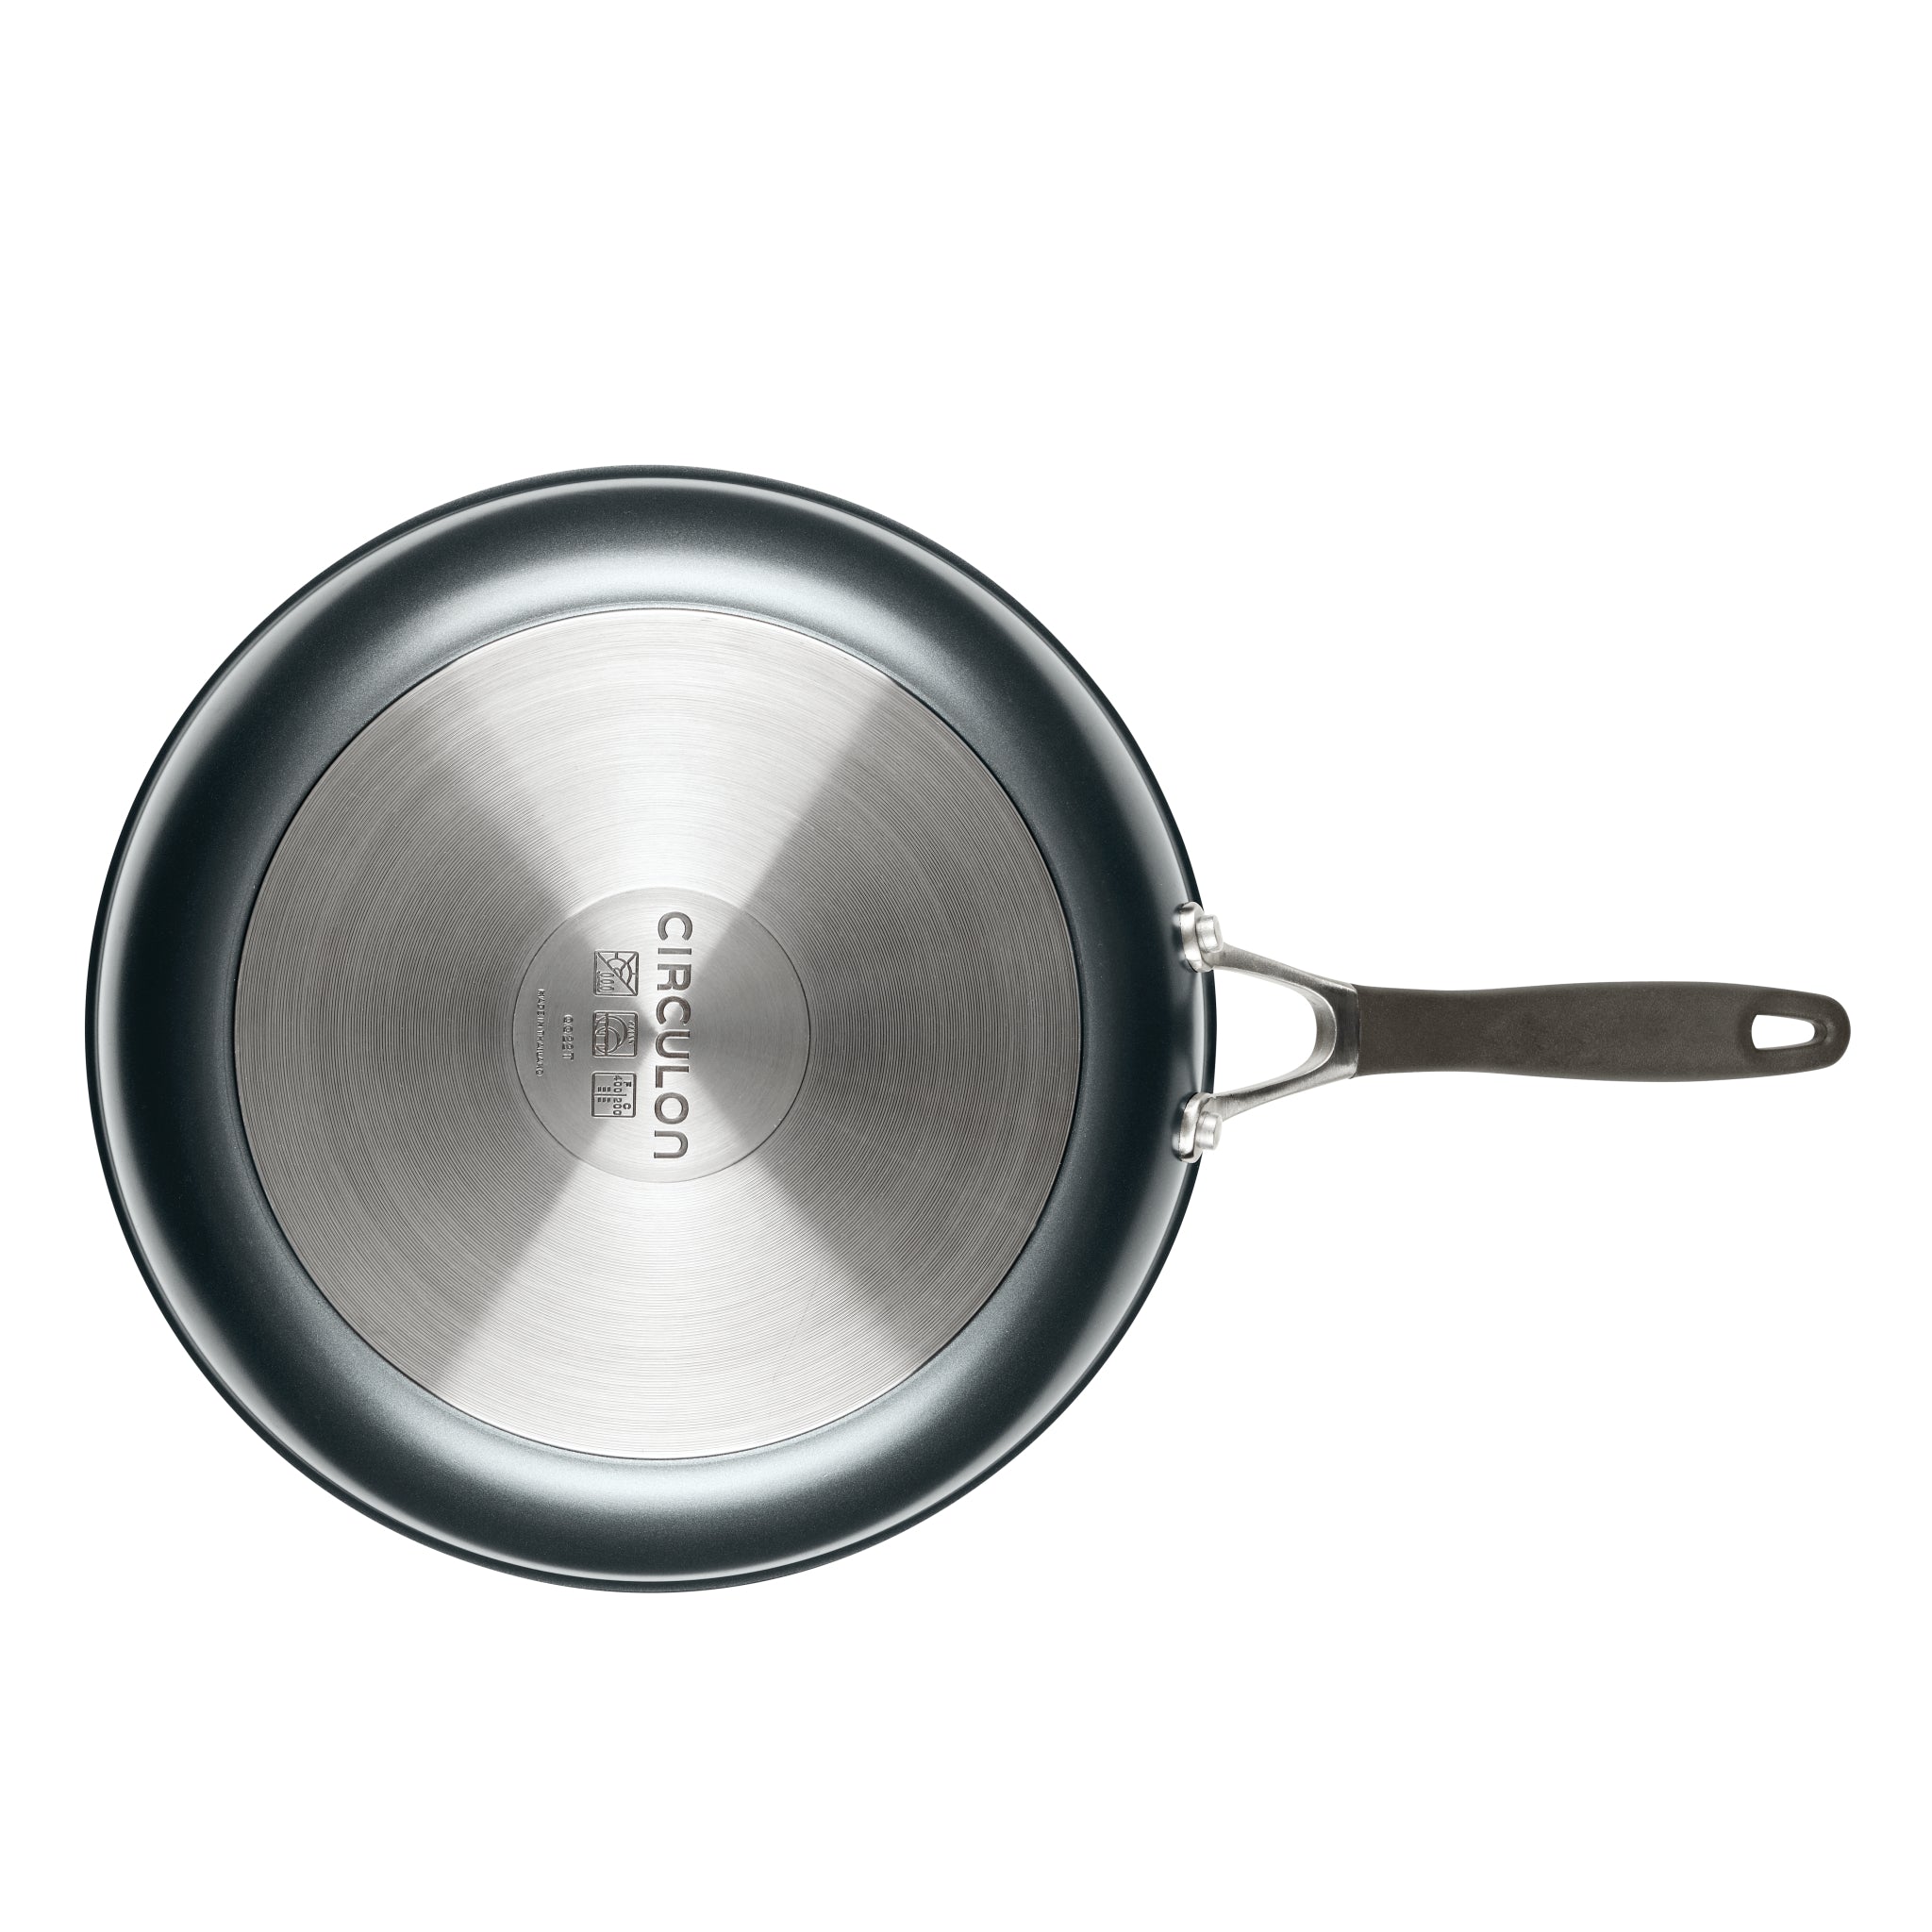 Stainless Steel Non Stick Frying Pans, Best Non Stick